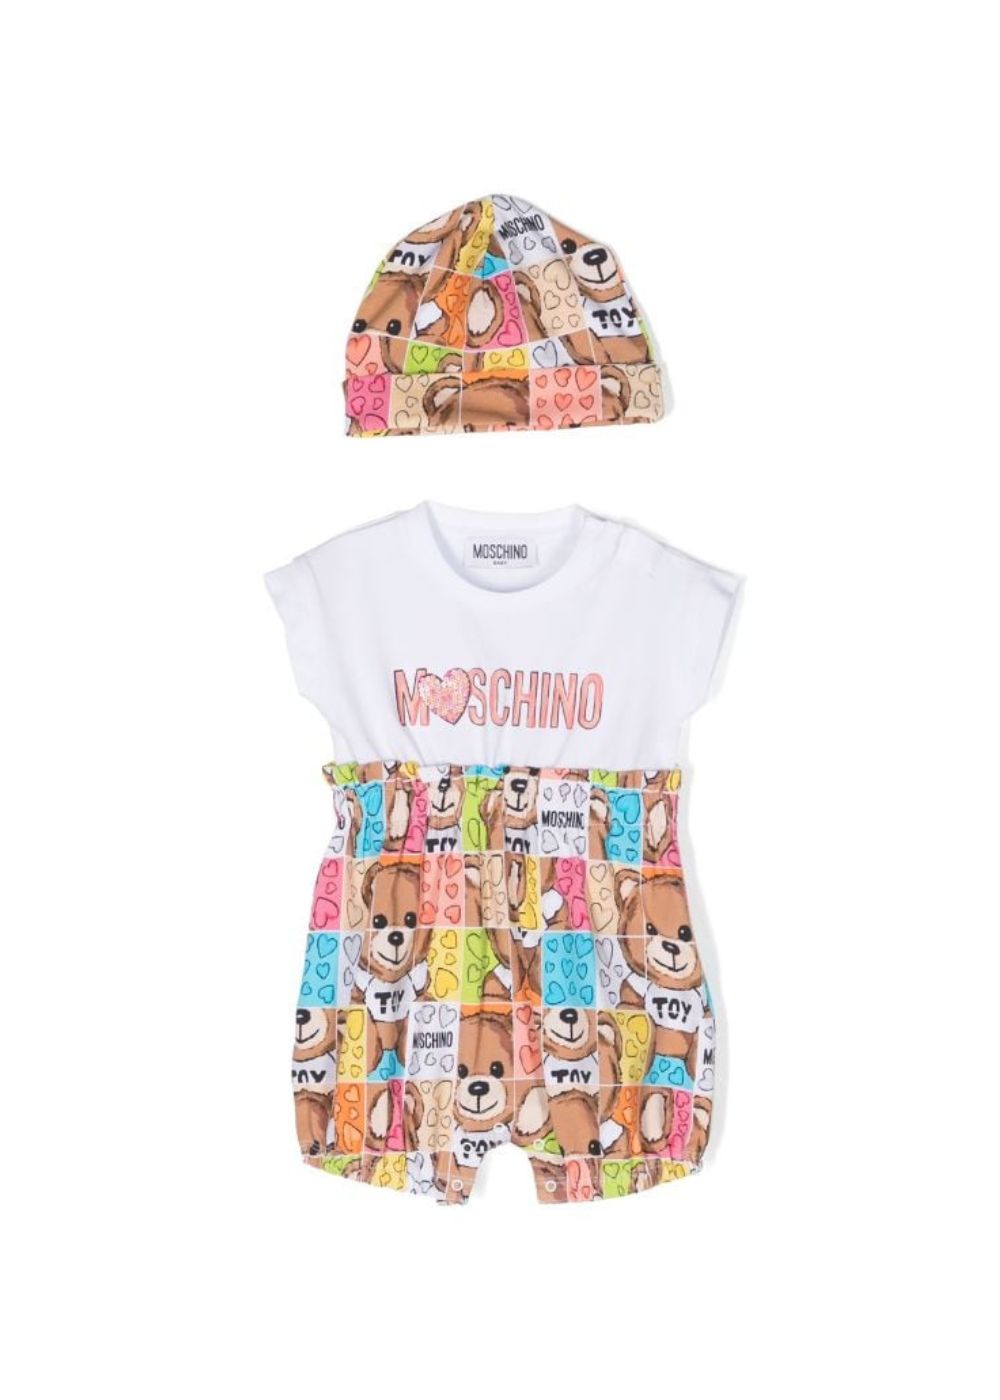 Featured image for “Moschino Tutina con stampa”